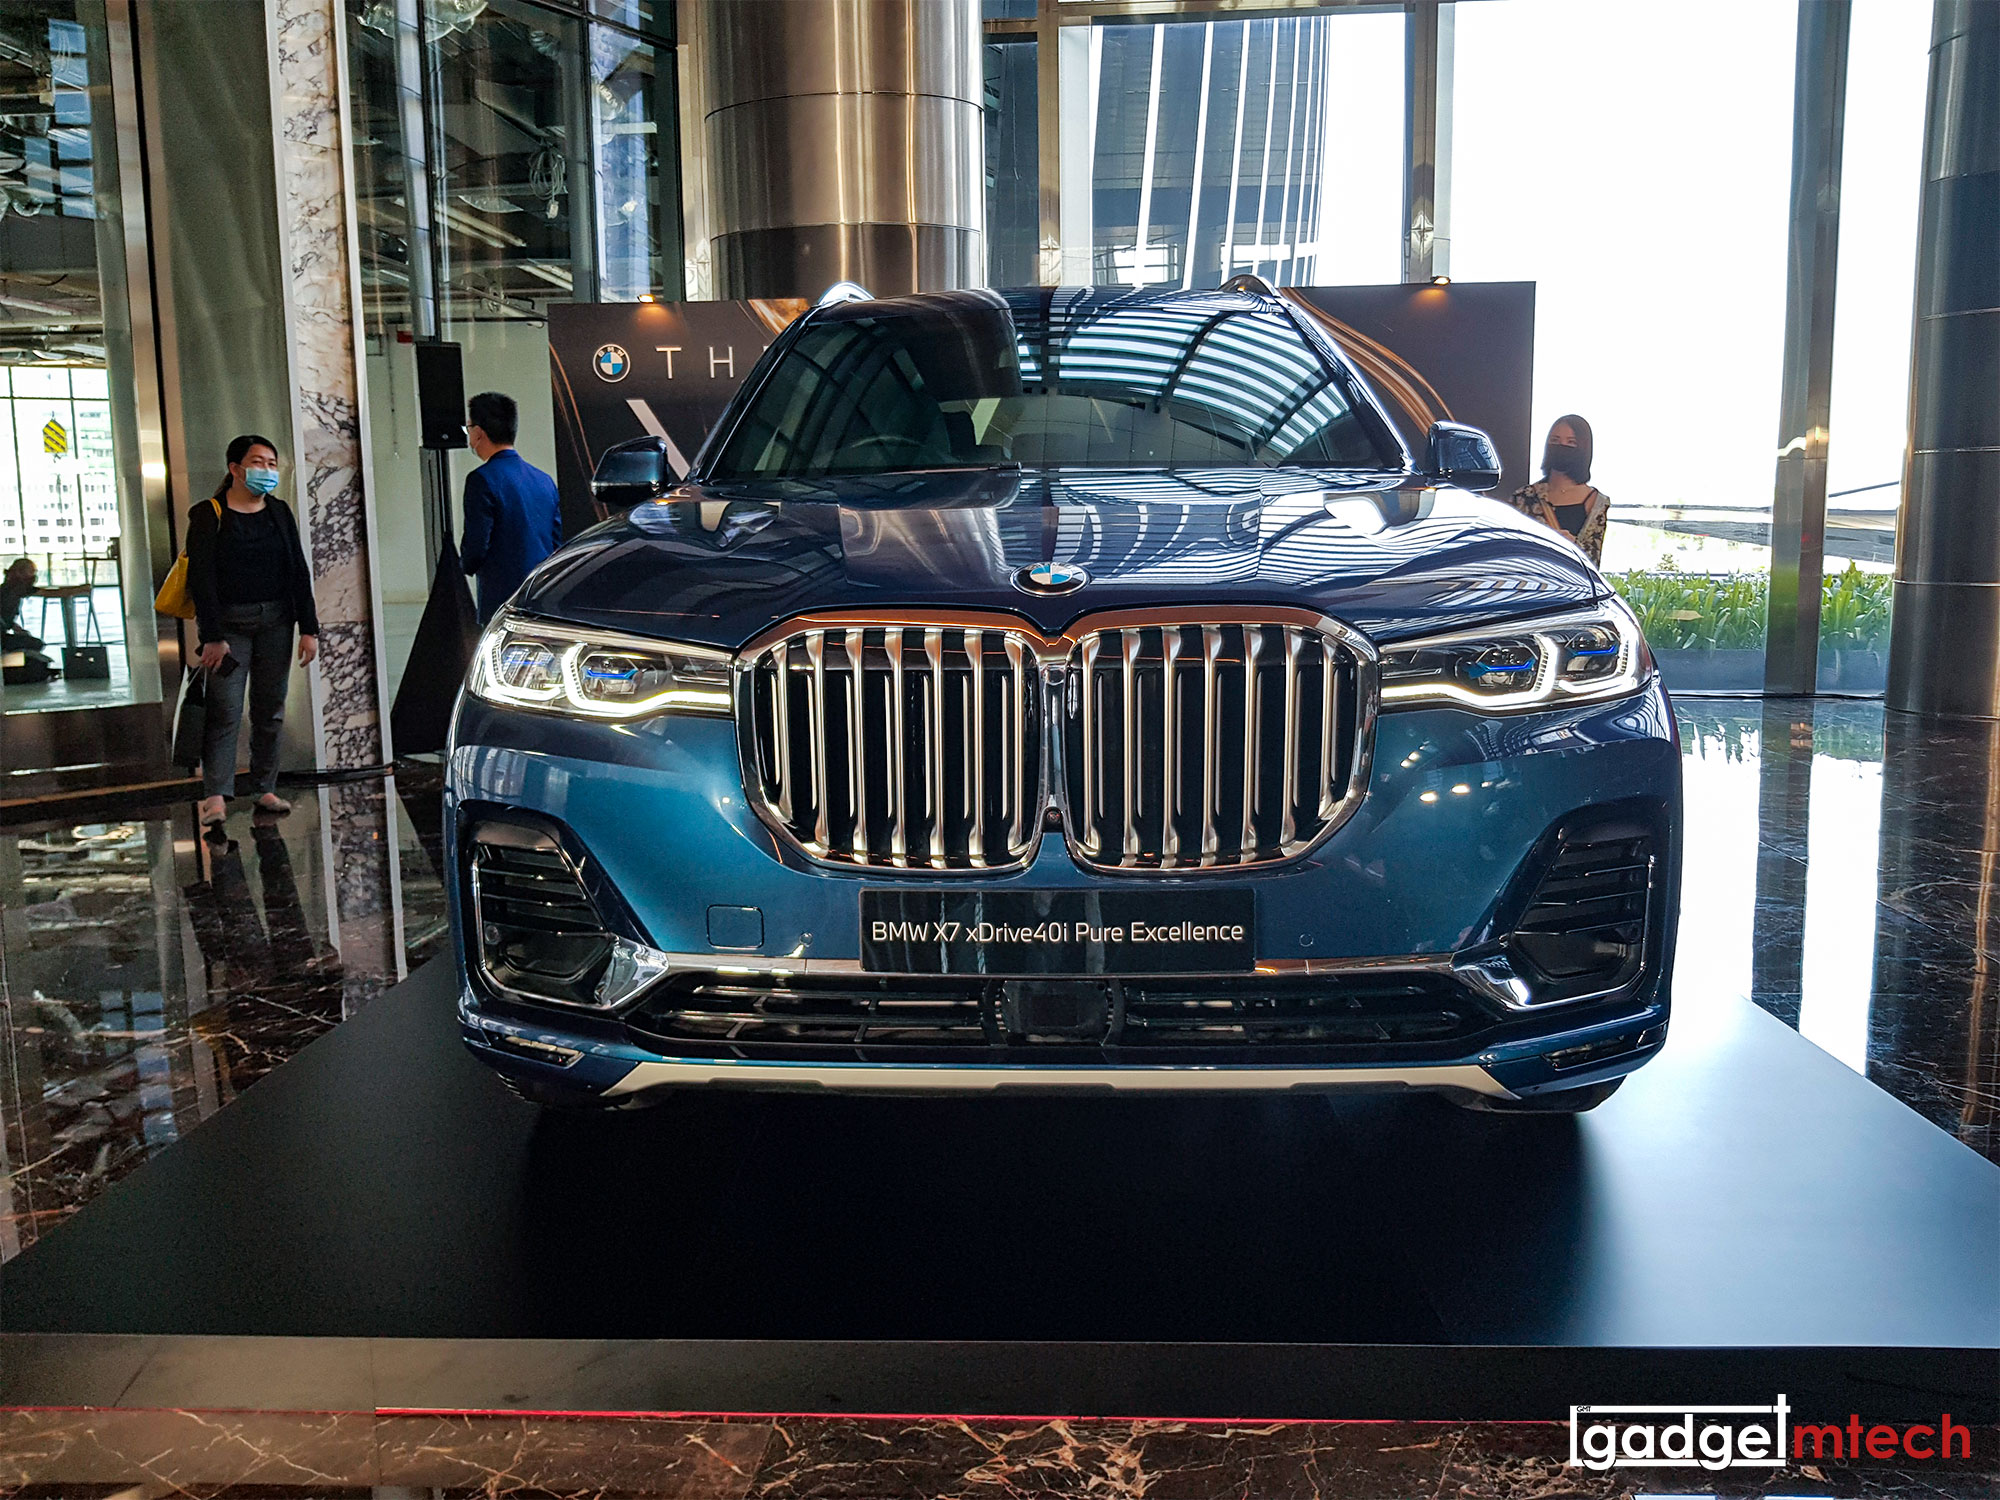 Locally Assembled BMW X7 xDrive40i Pure Excellence Previewed in Malaysia